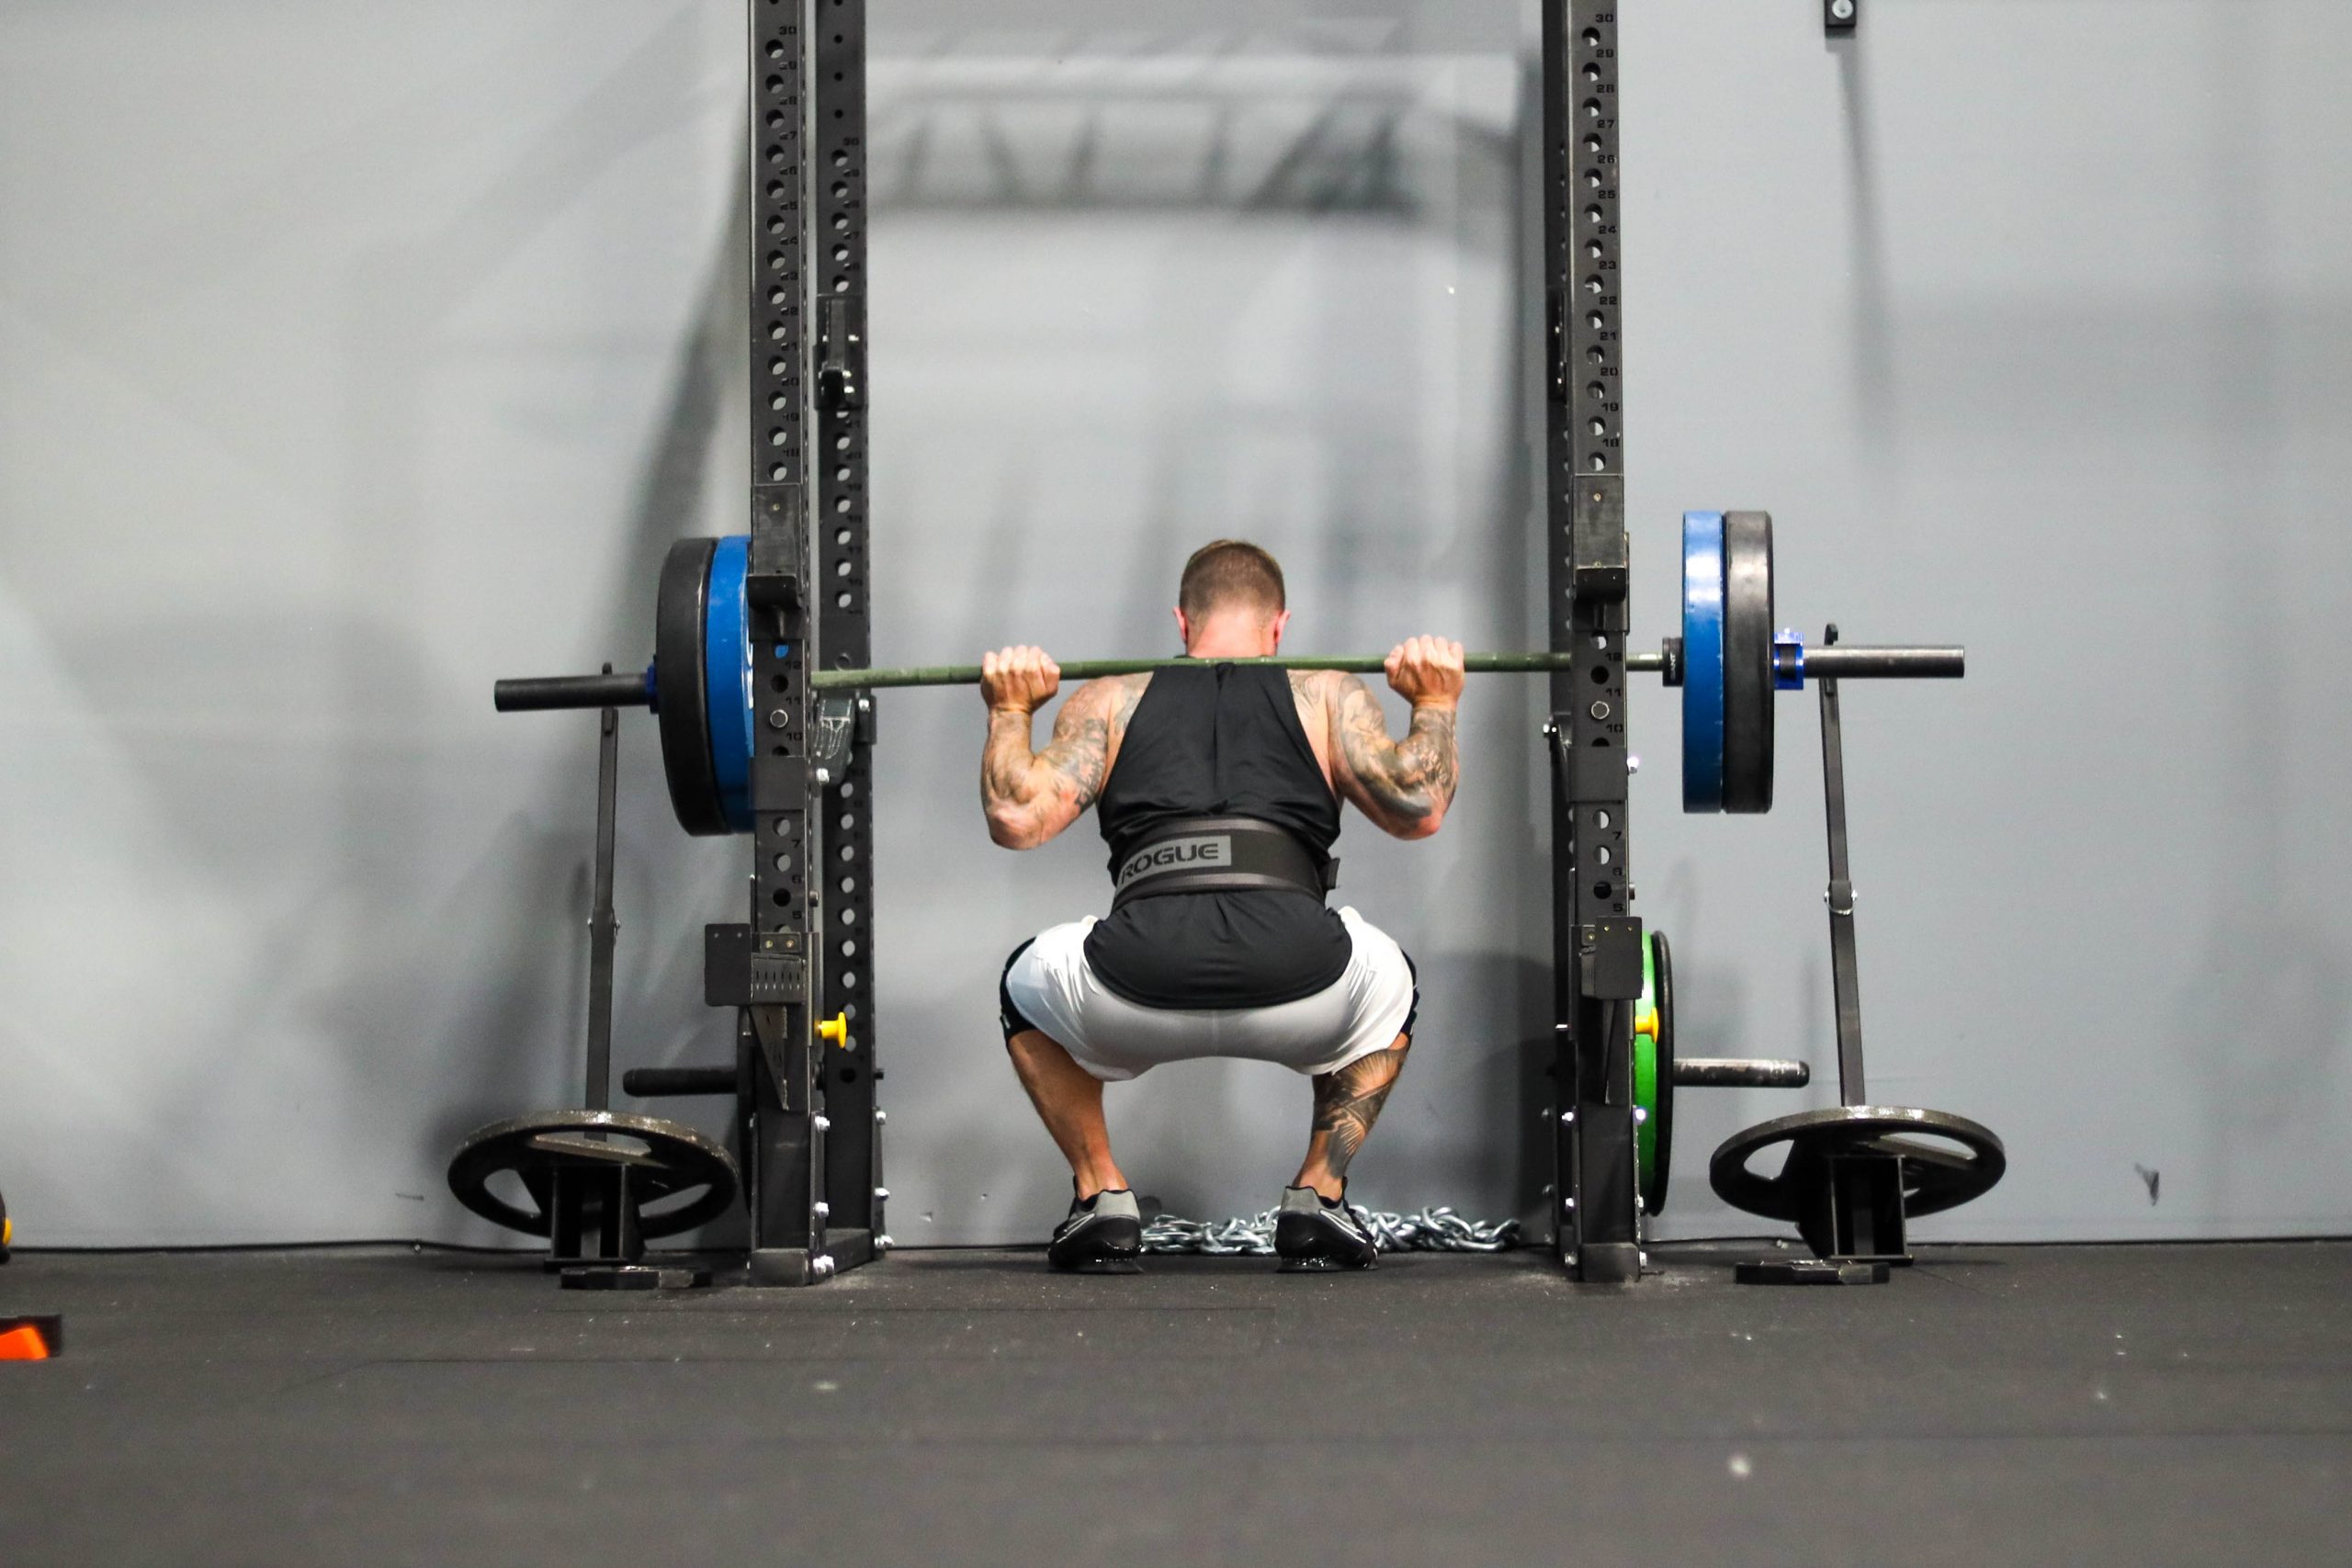 Heavy back squats -- powerlifting focused